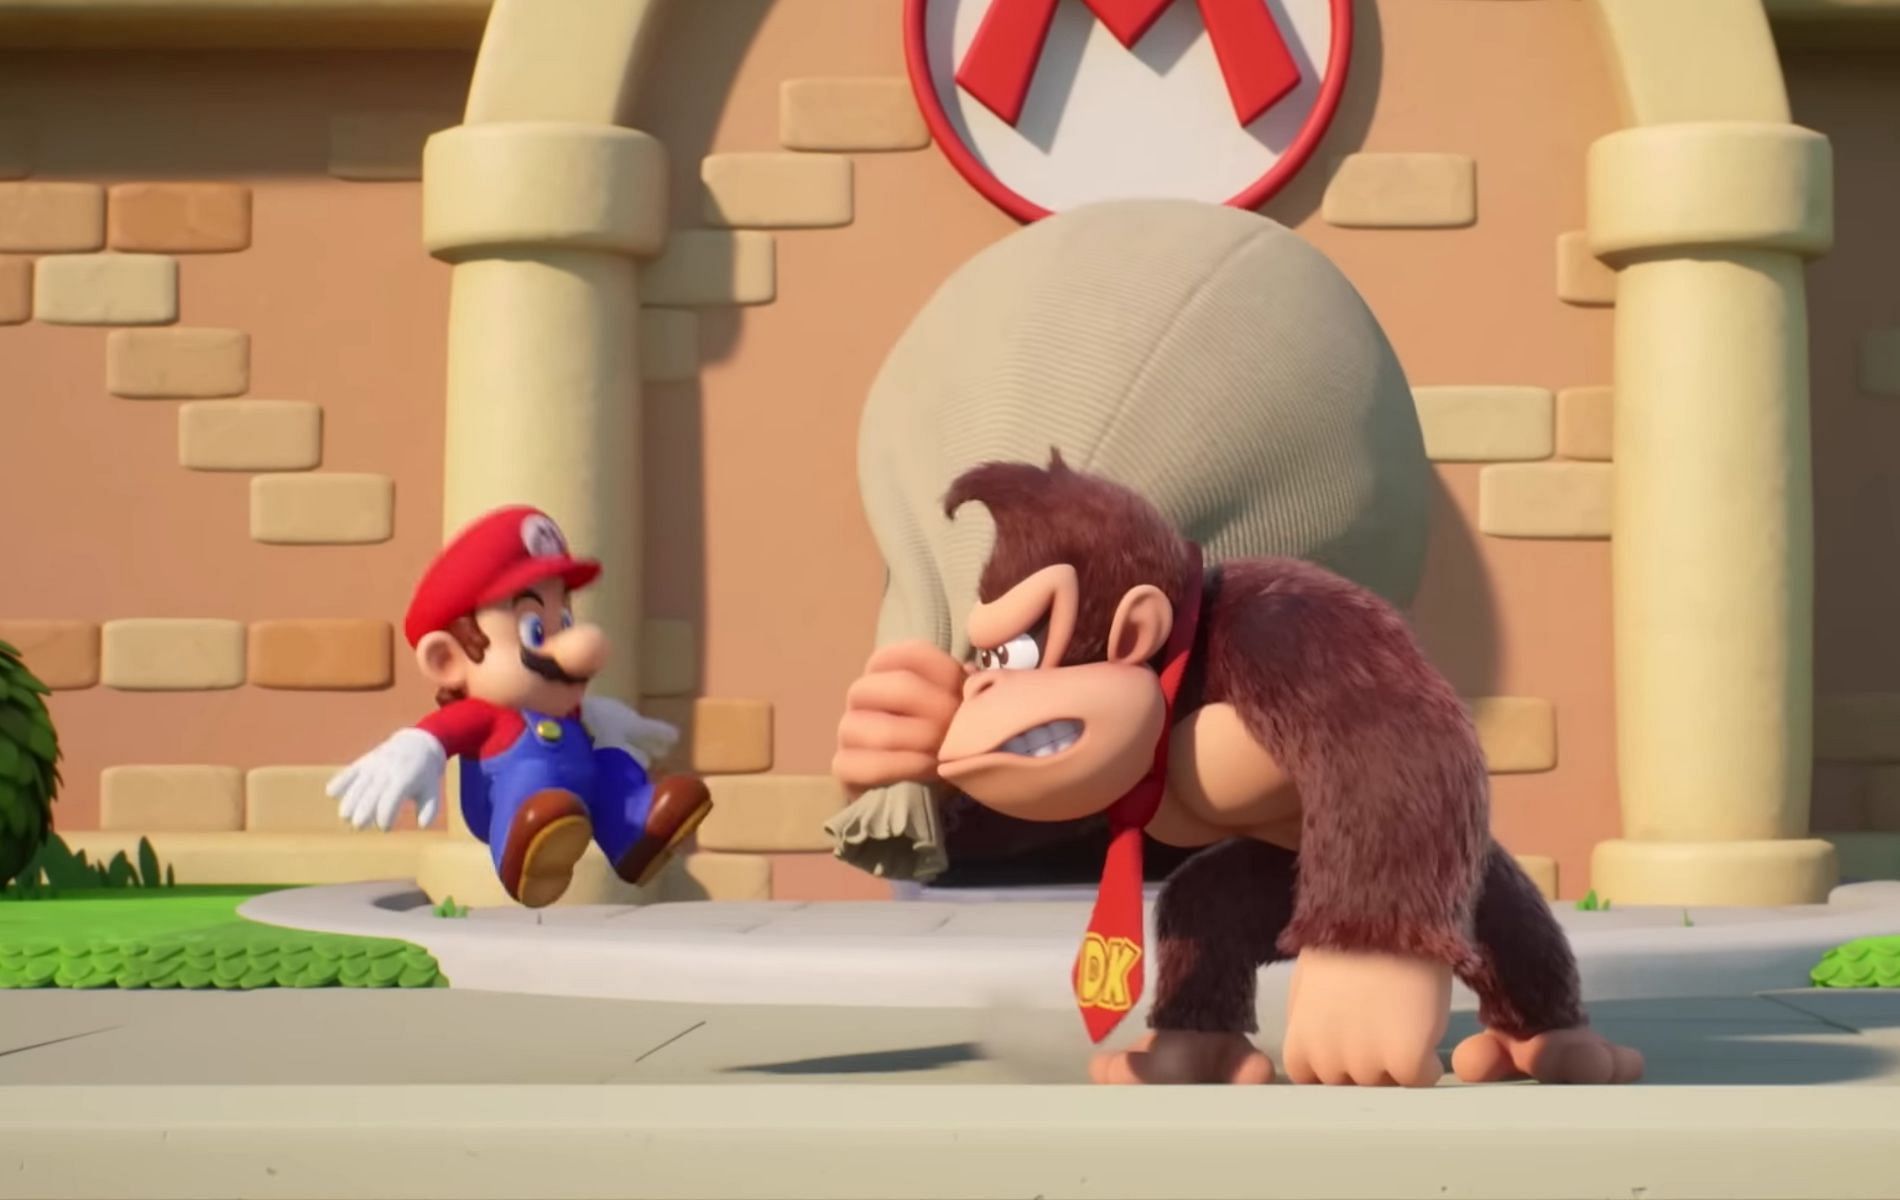 Nintendo is reportedly working on a new Donkey Kong game for the